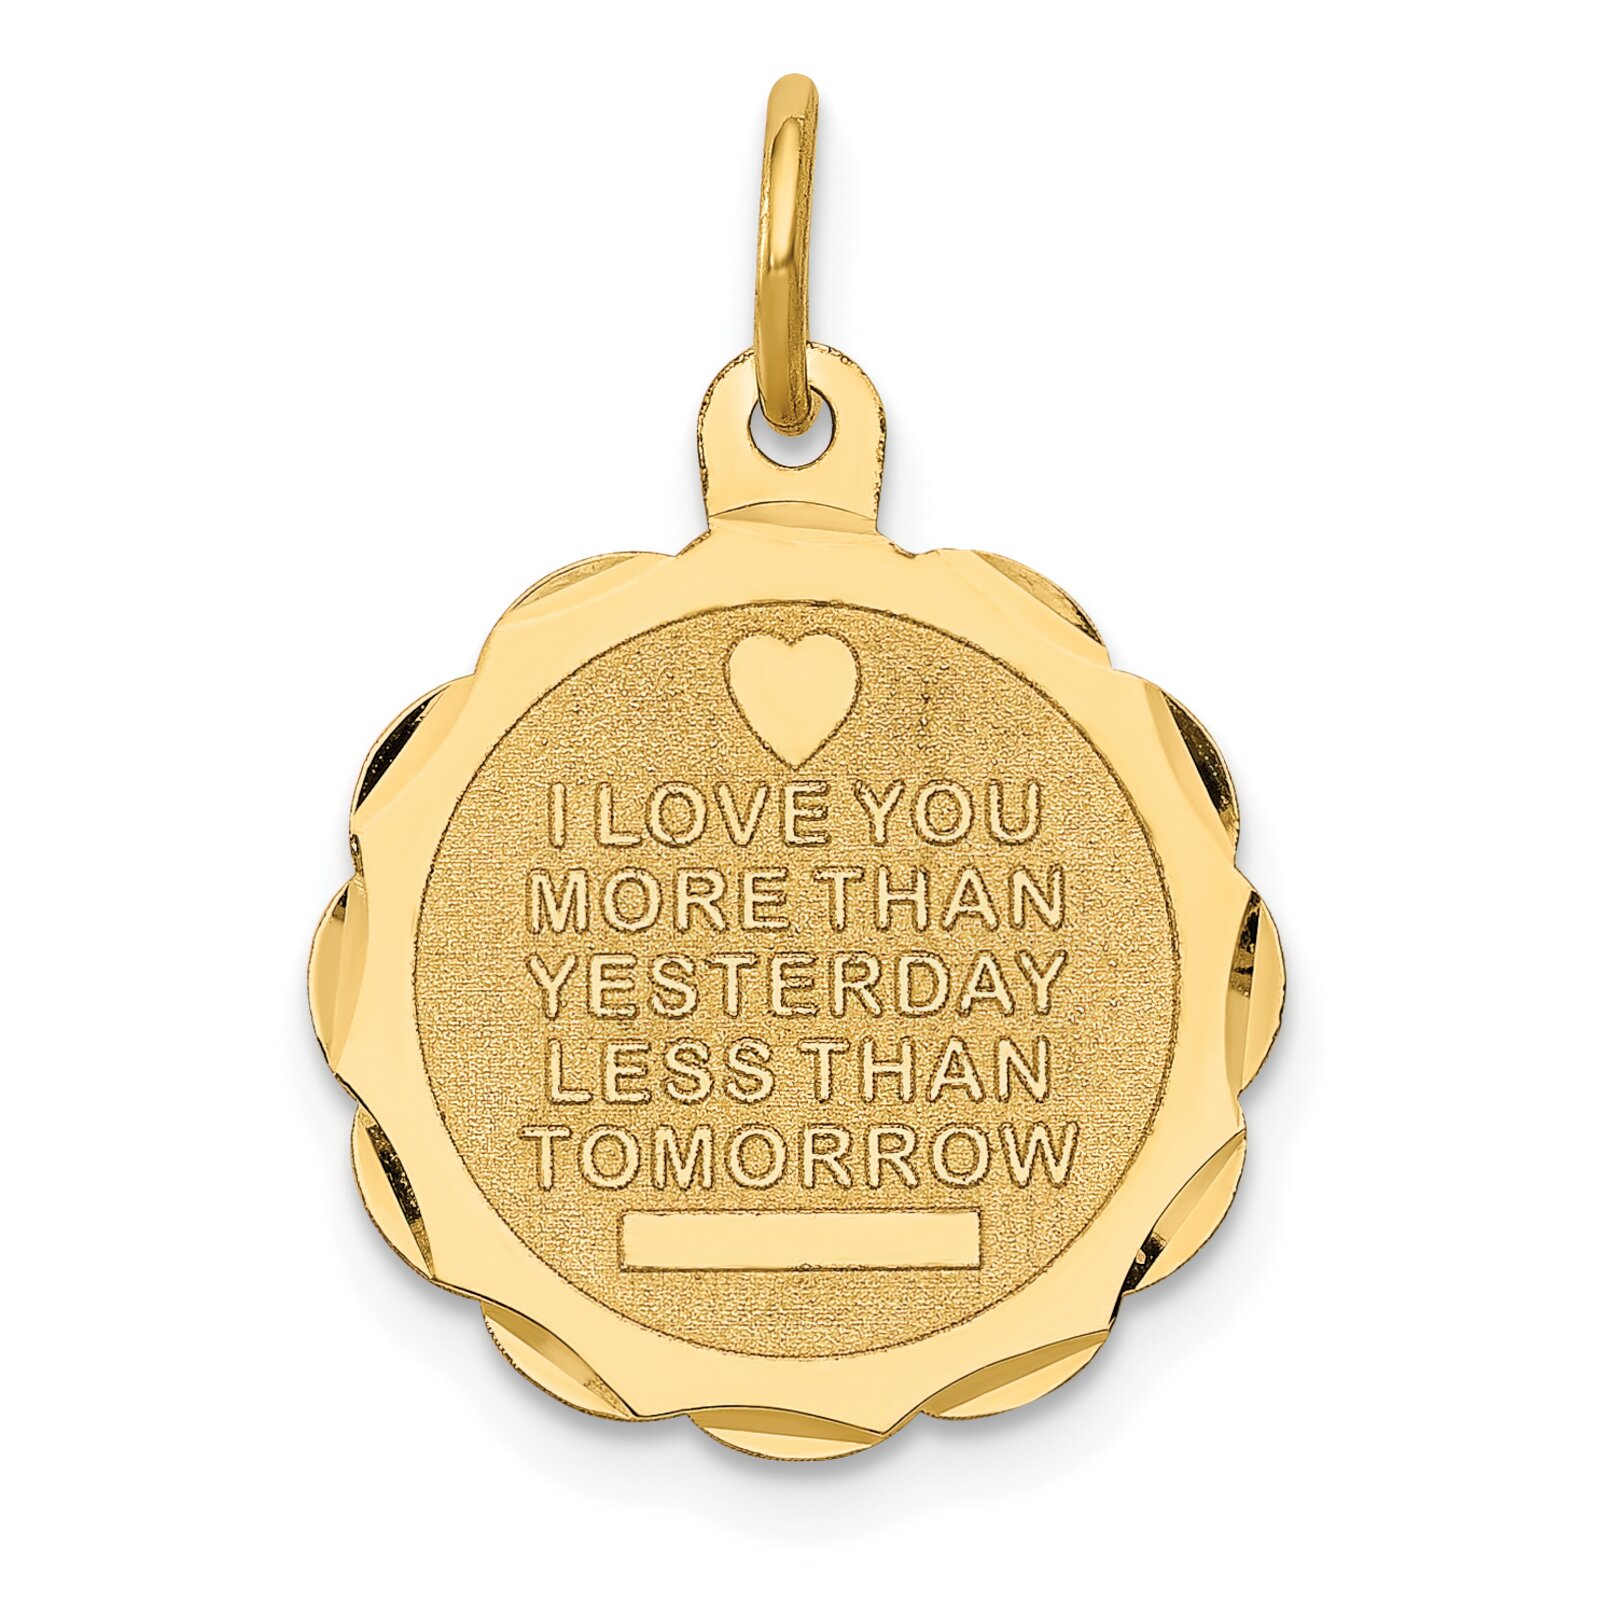 Findingking 14K Gold I Love You More Than Yesterday Charm